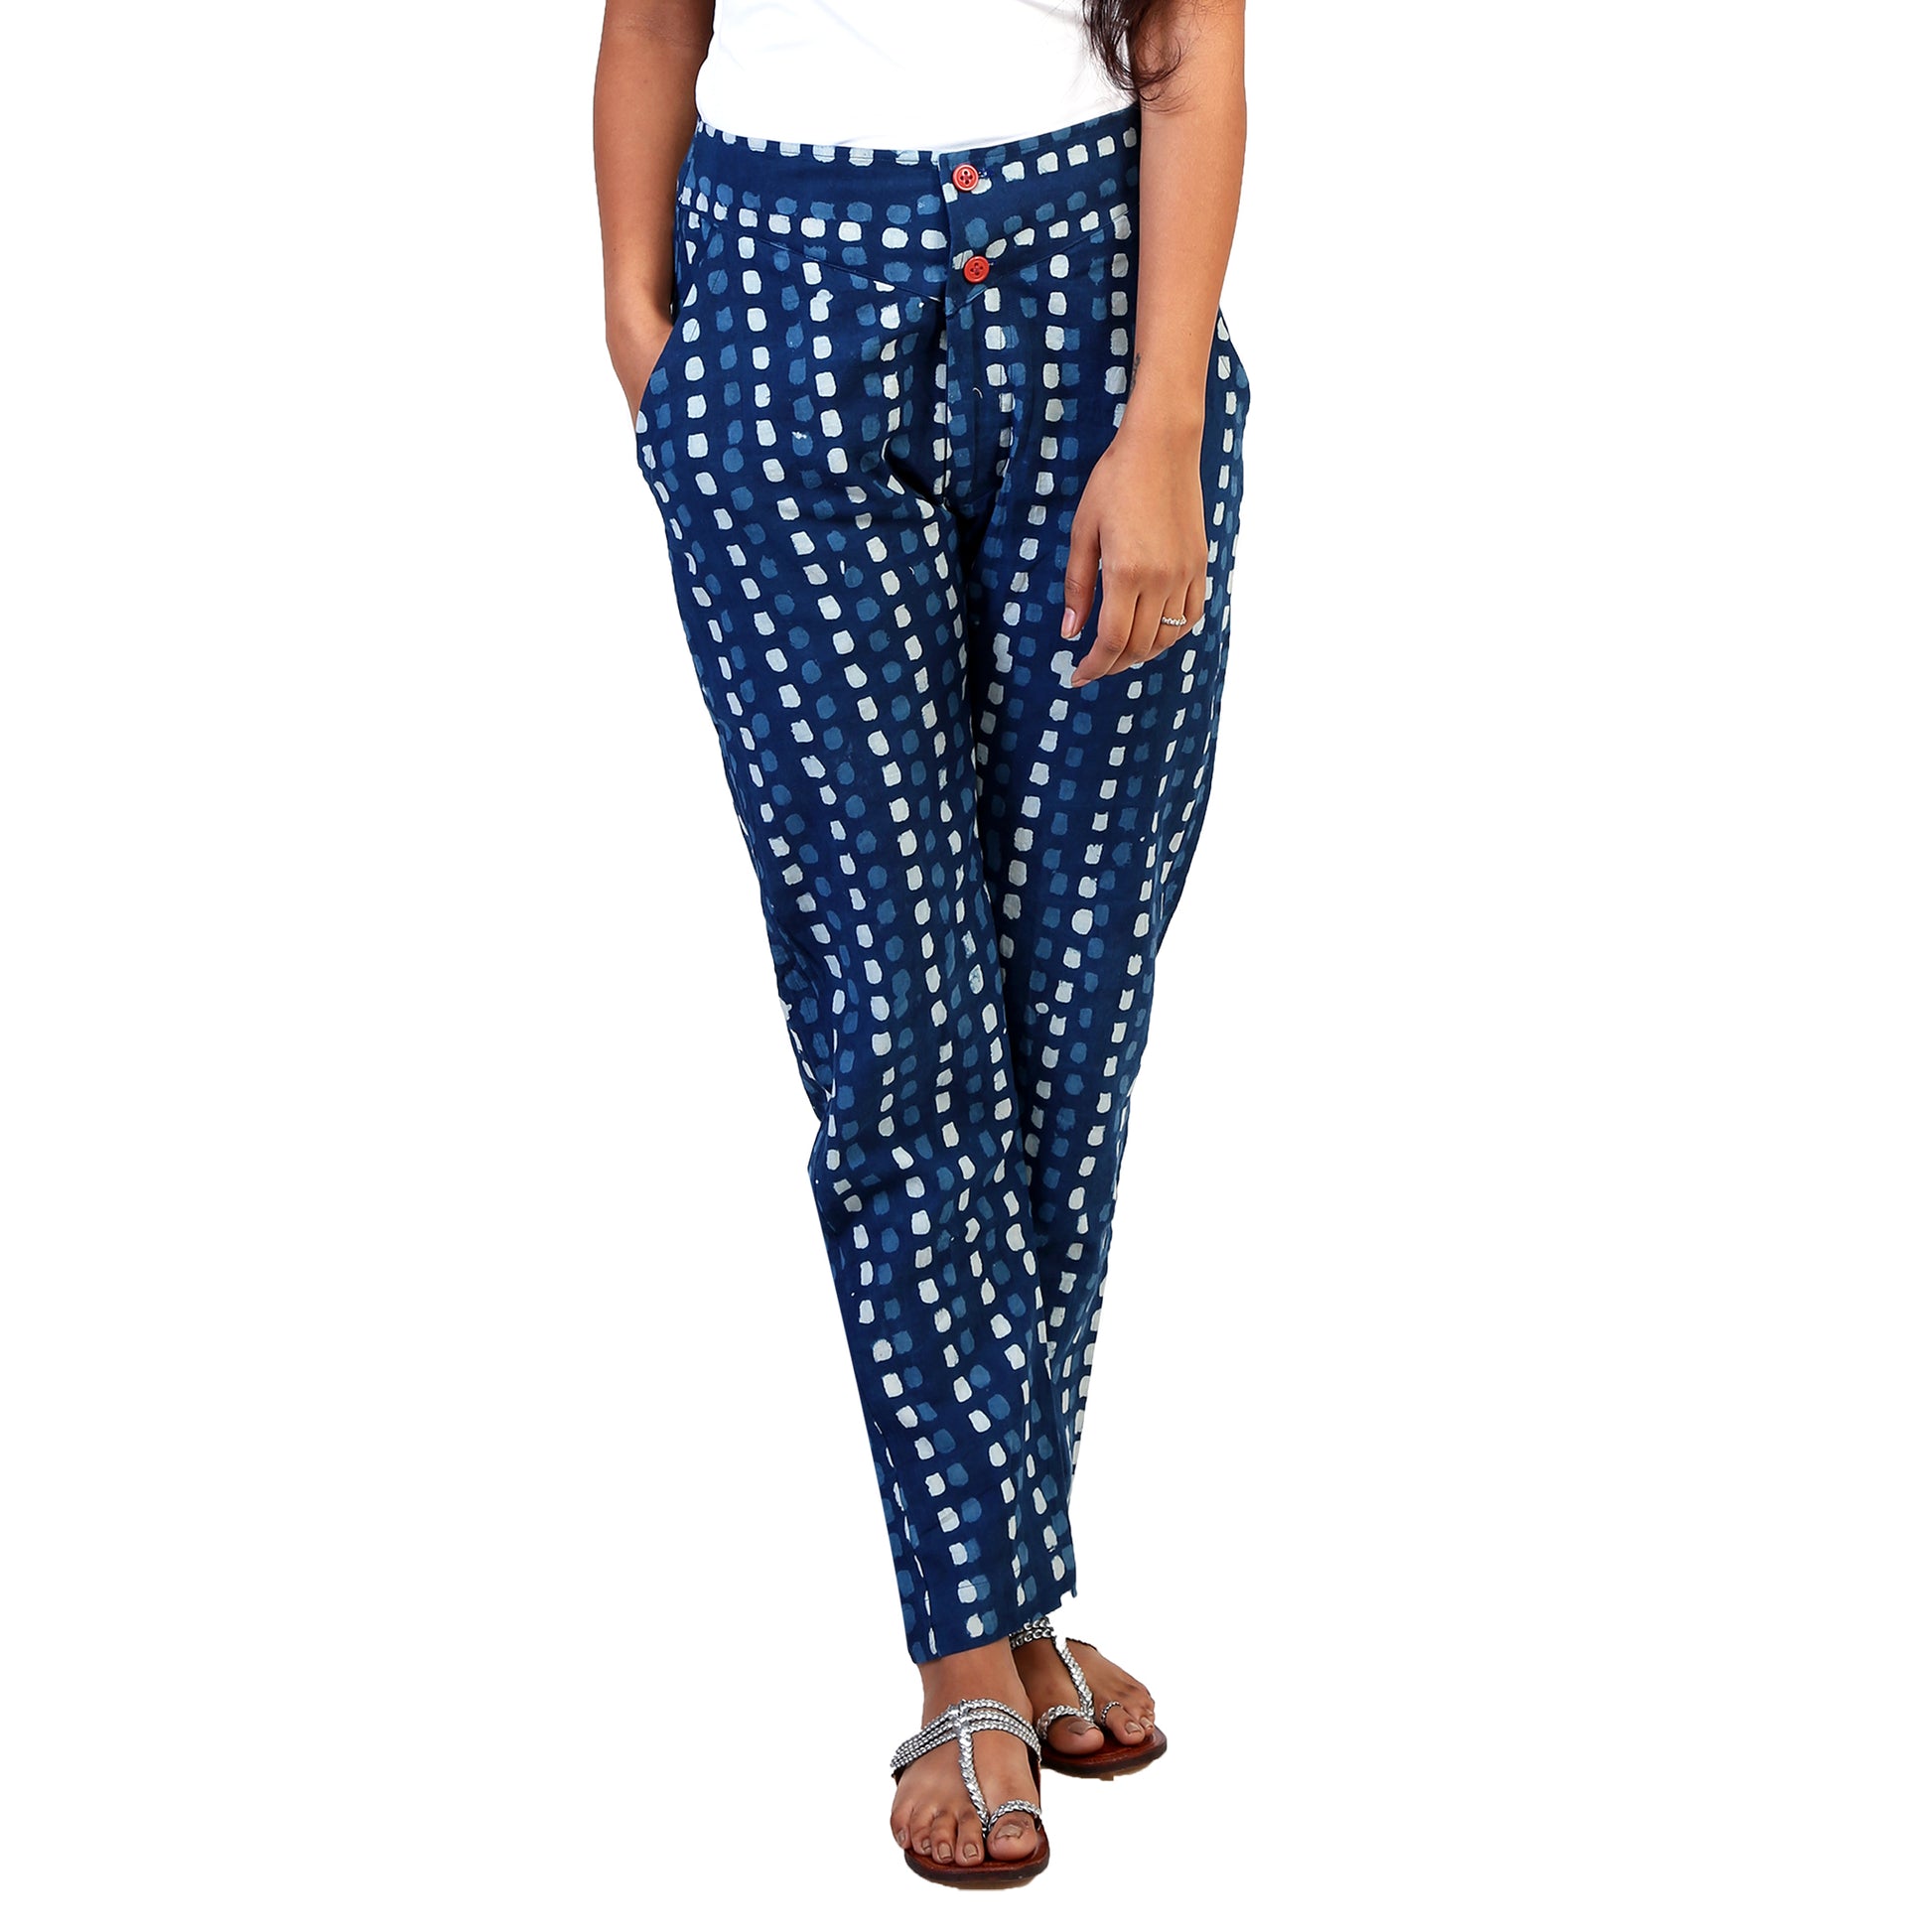 women's-printed-cotton-pants-with-pockets-online